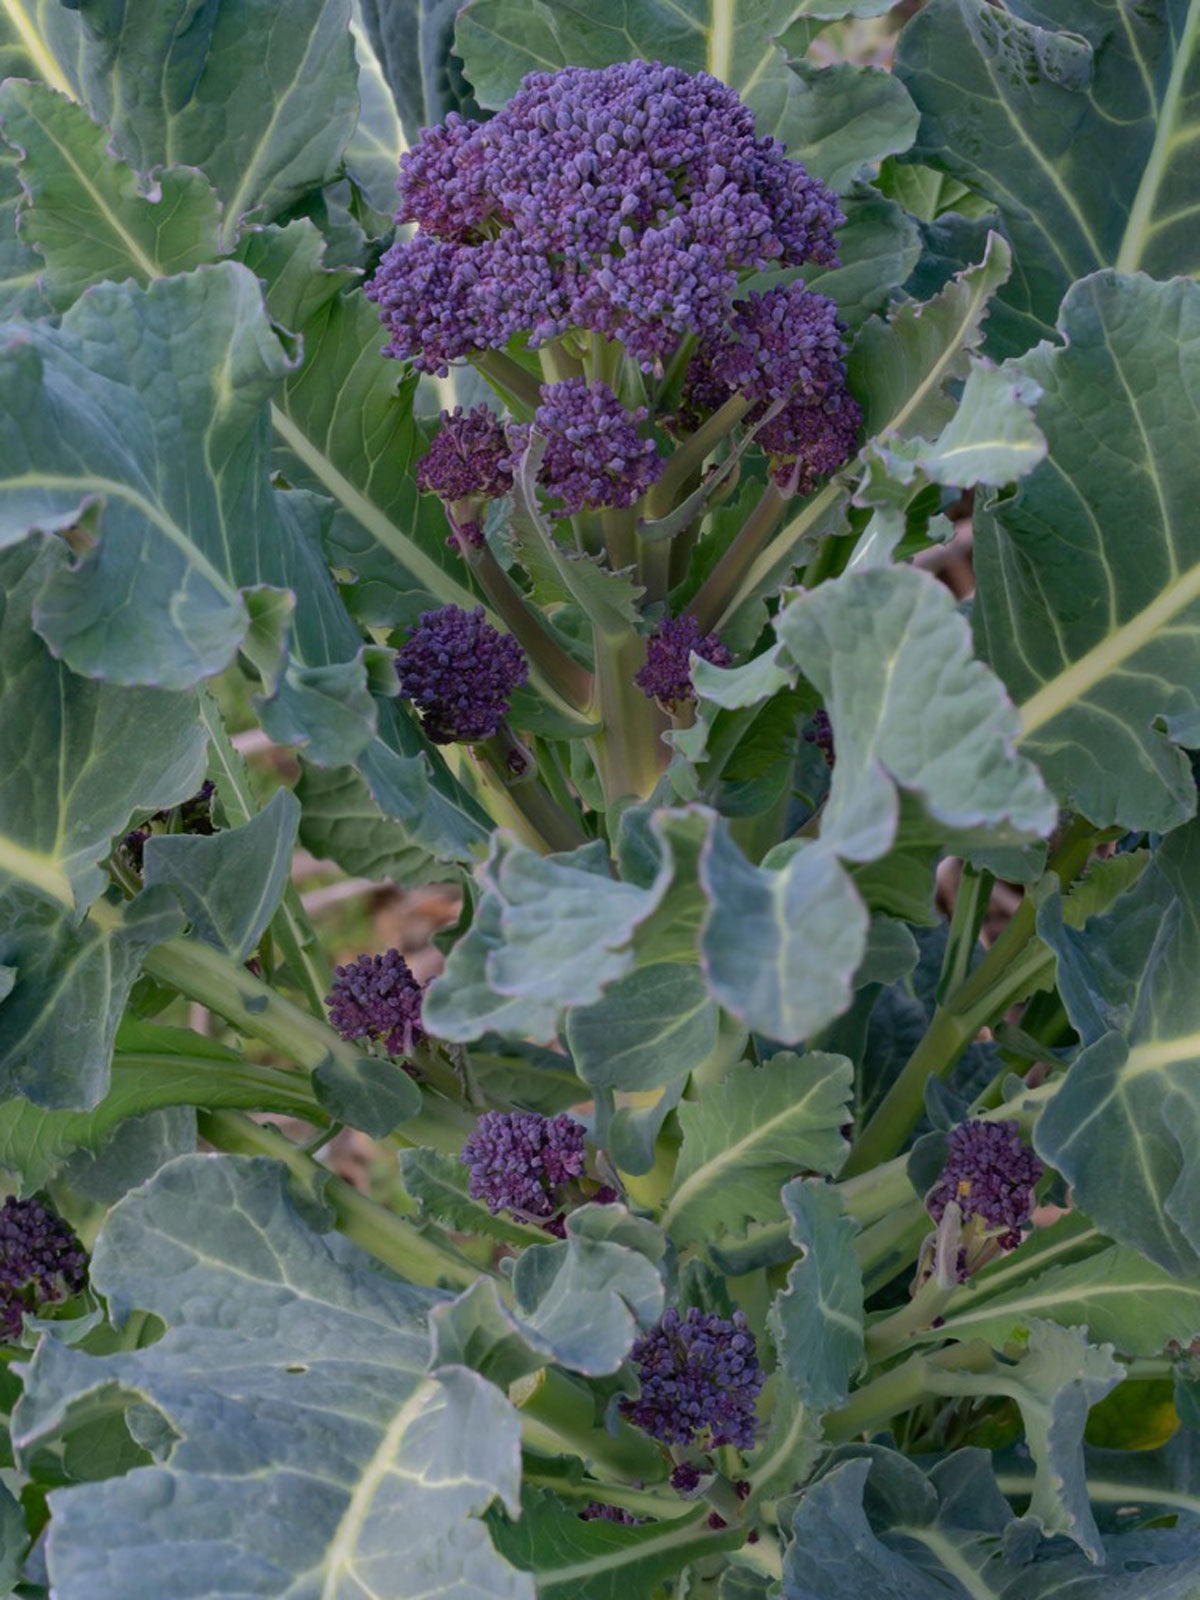 Broccoli Purple Sprouting GROW Your Own as it’s Easy & Satisfying 50 Seeds 